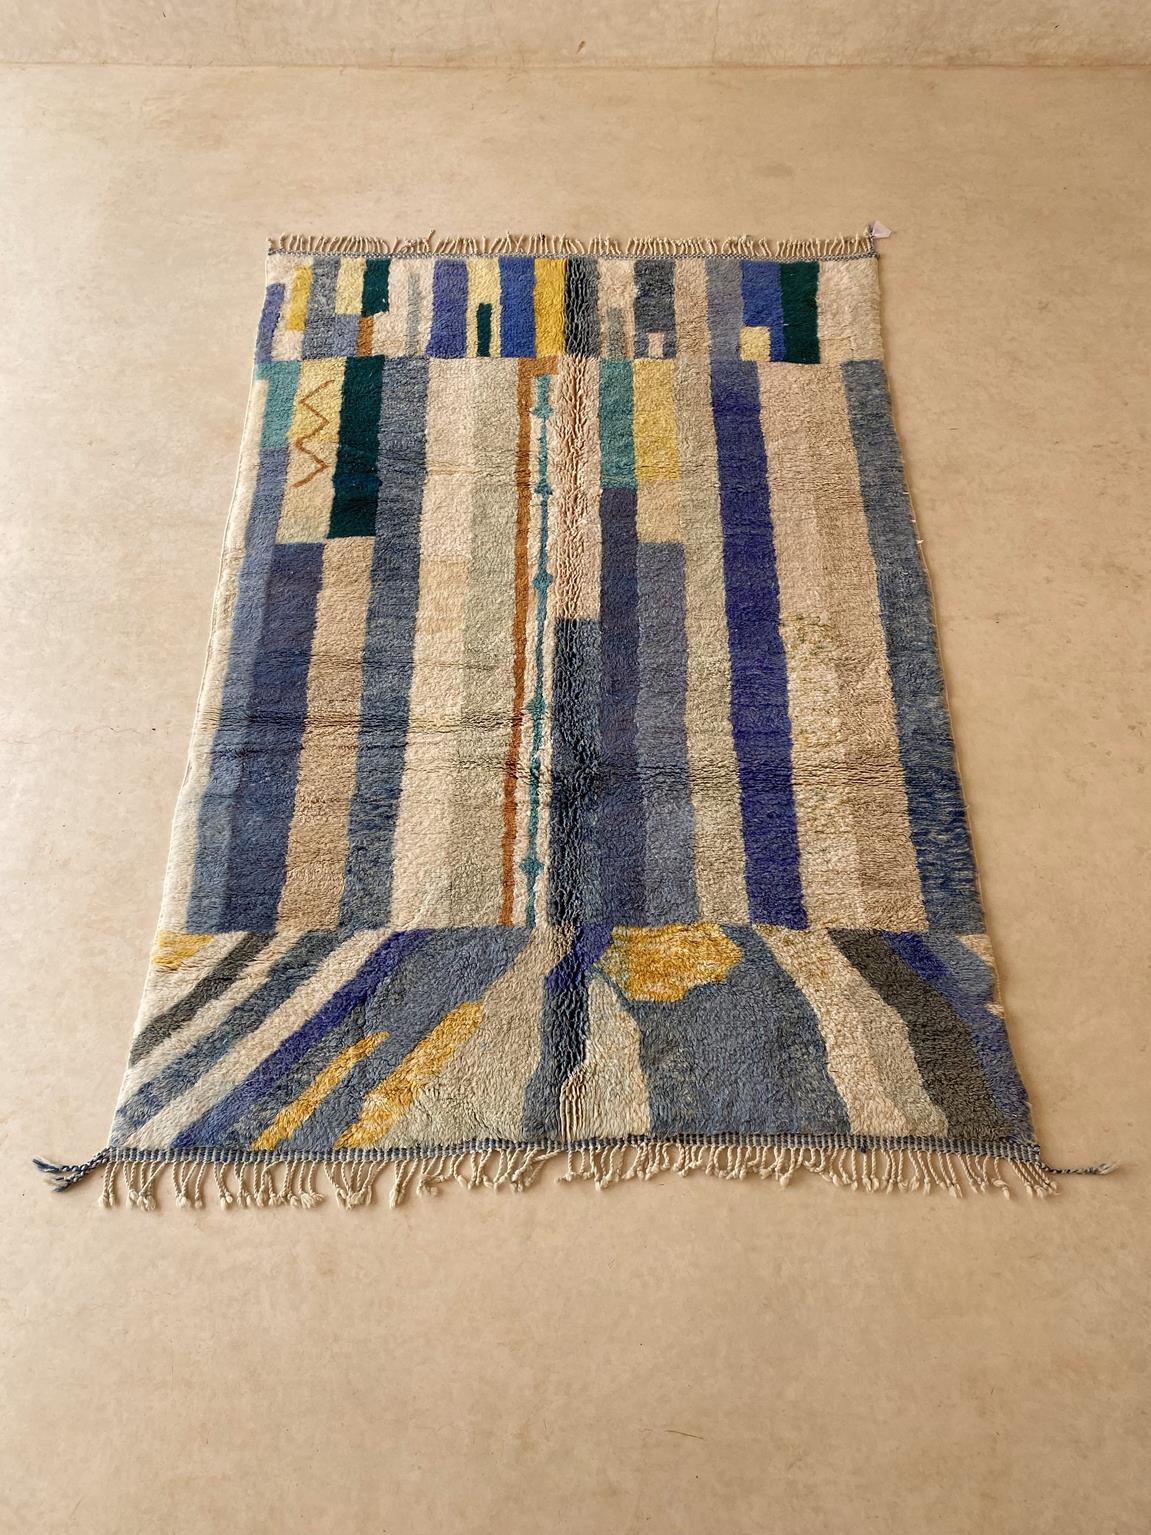 This large, modern-style, Mrirt rug was made by artisans in the area of Khenifra, Atlas Mountains, Morocco. Groups of women there still weave by hand on traditional, vertical looms to make these new rugs.

The colors are a mix of blue, grey-blue,